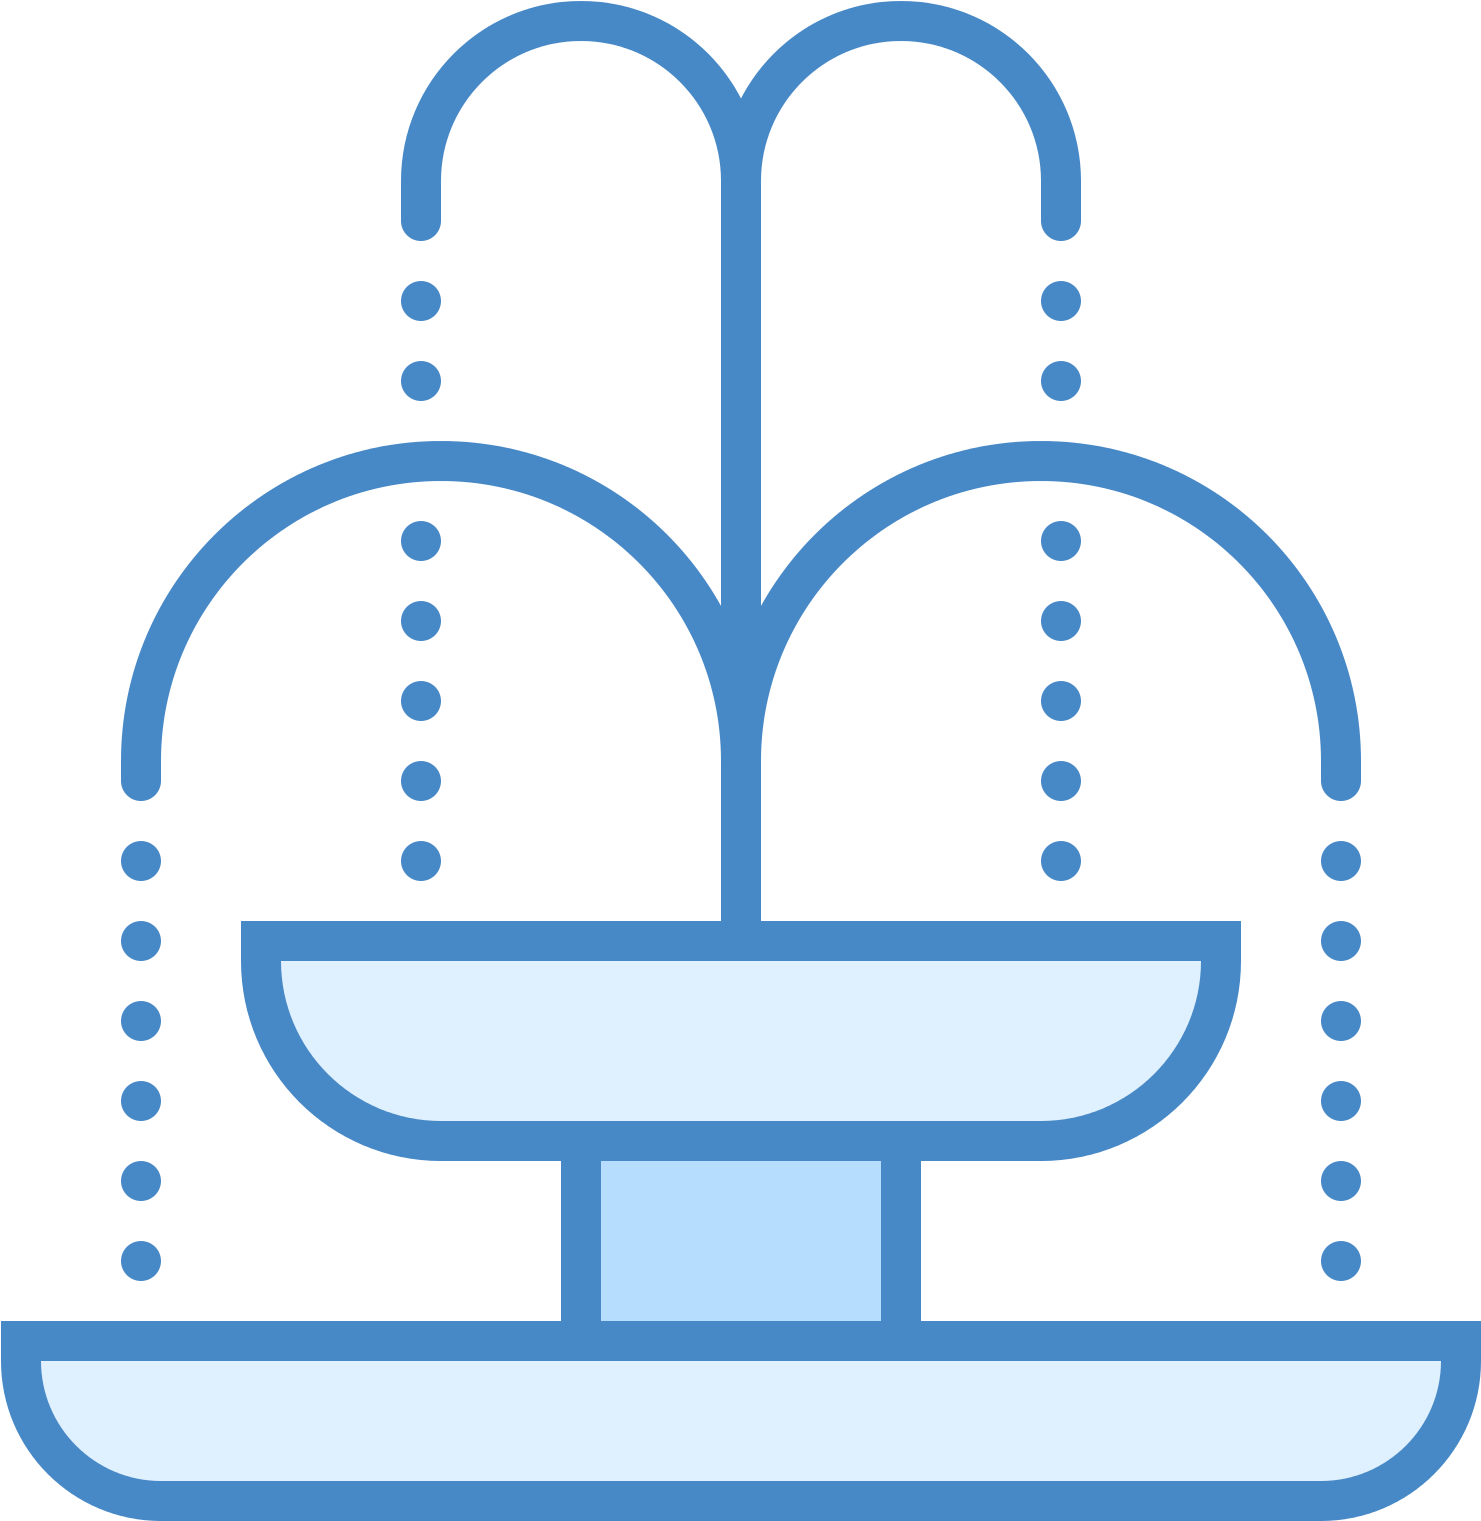 Iconic Blue Fountain Graphic PNG image